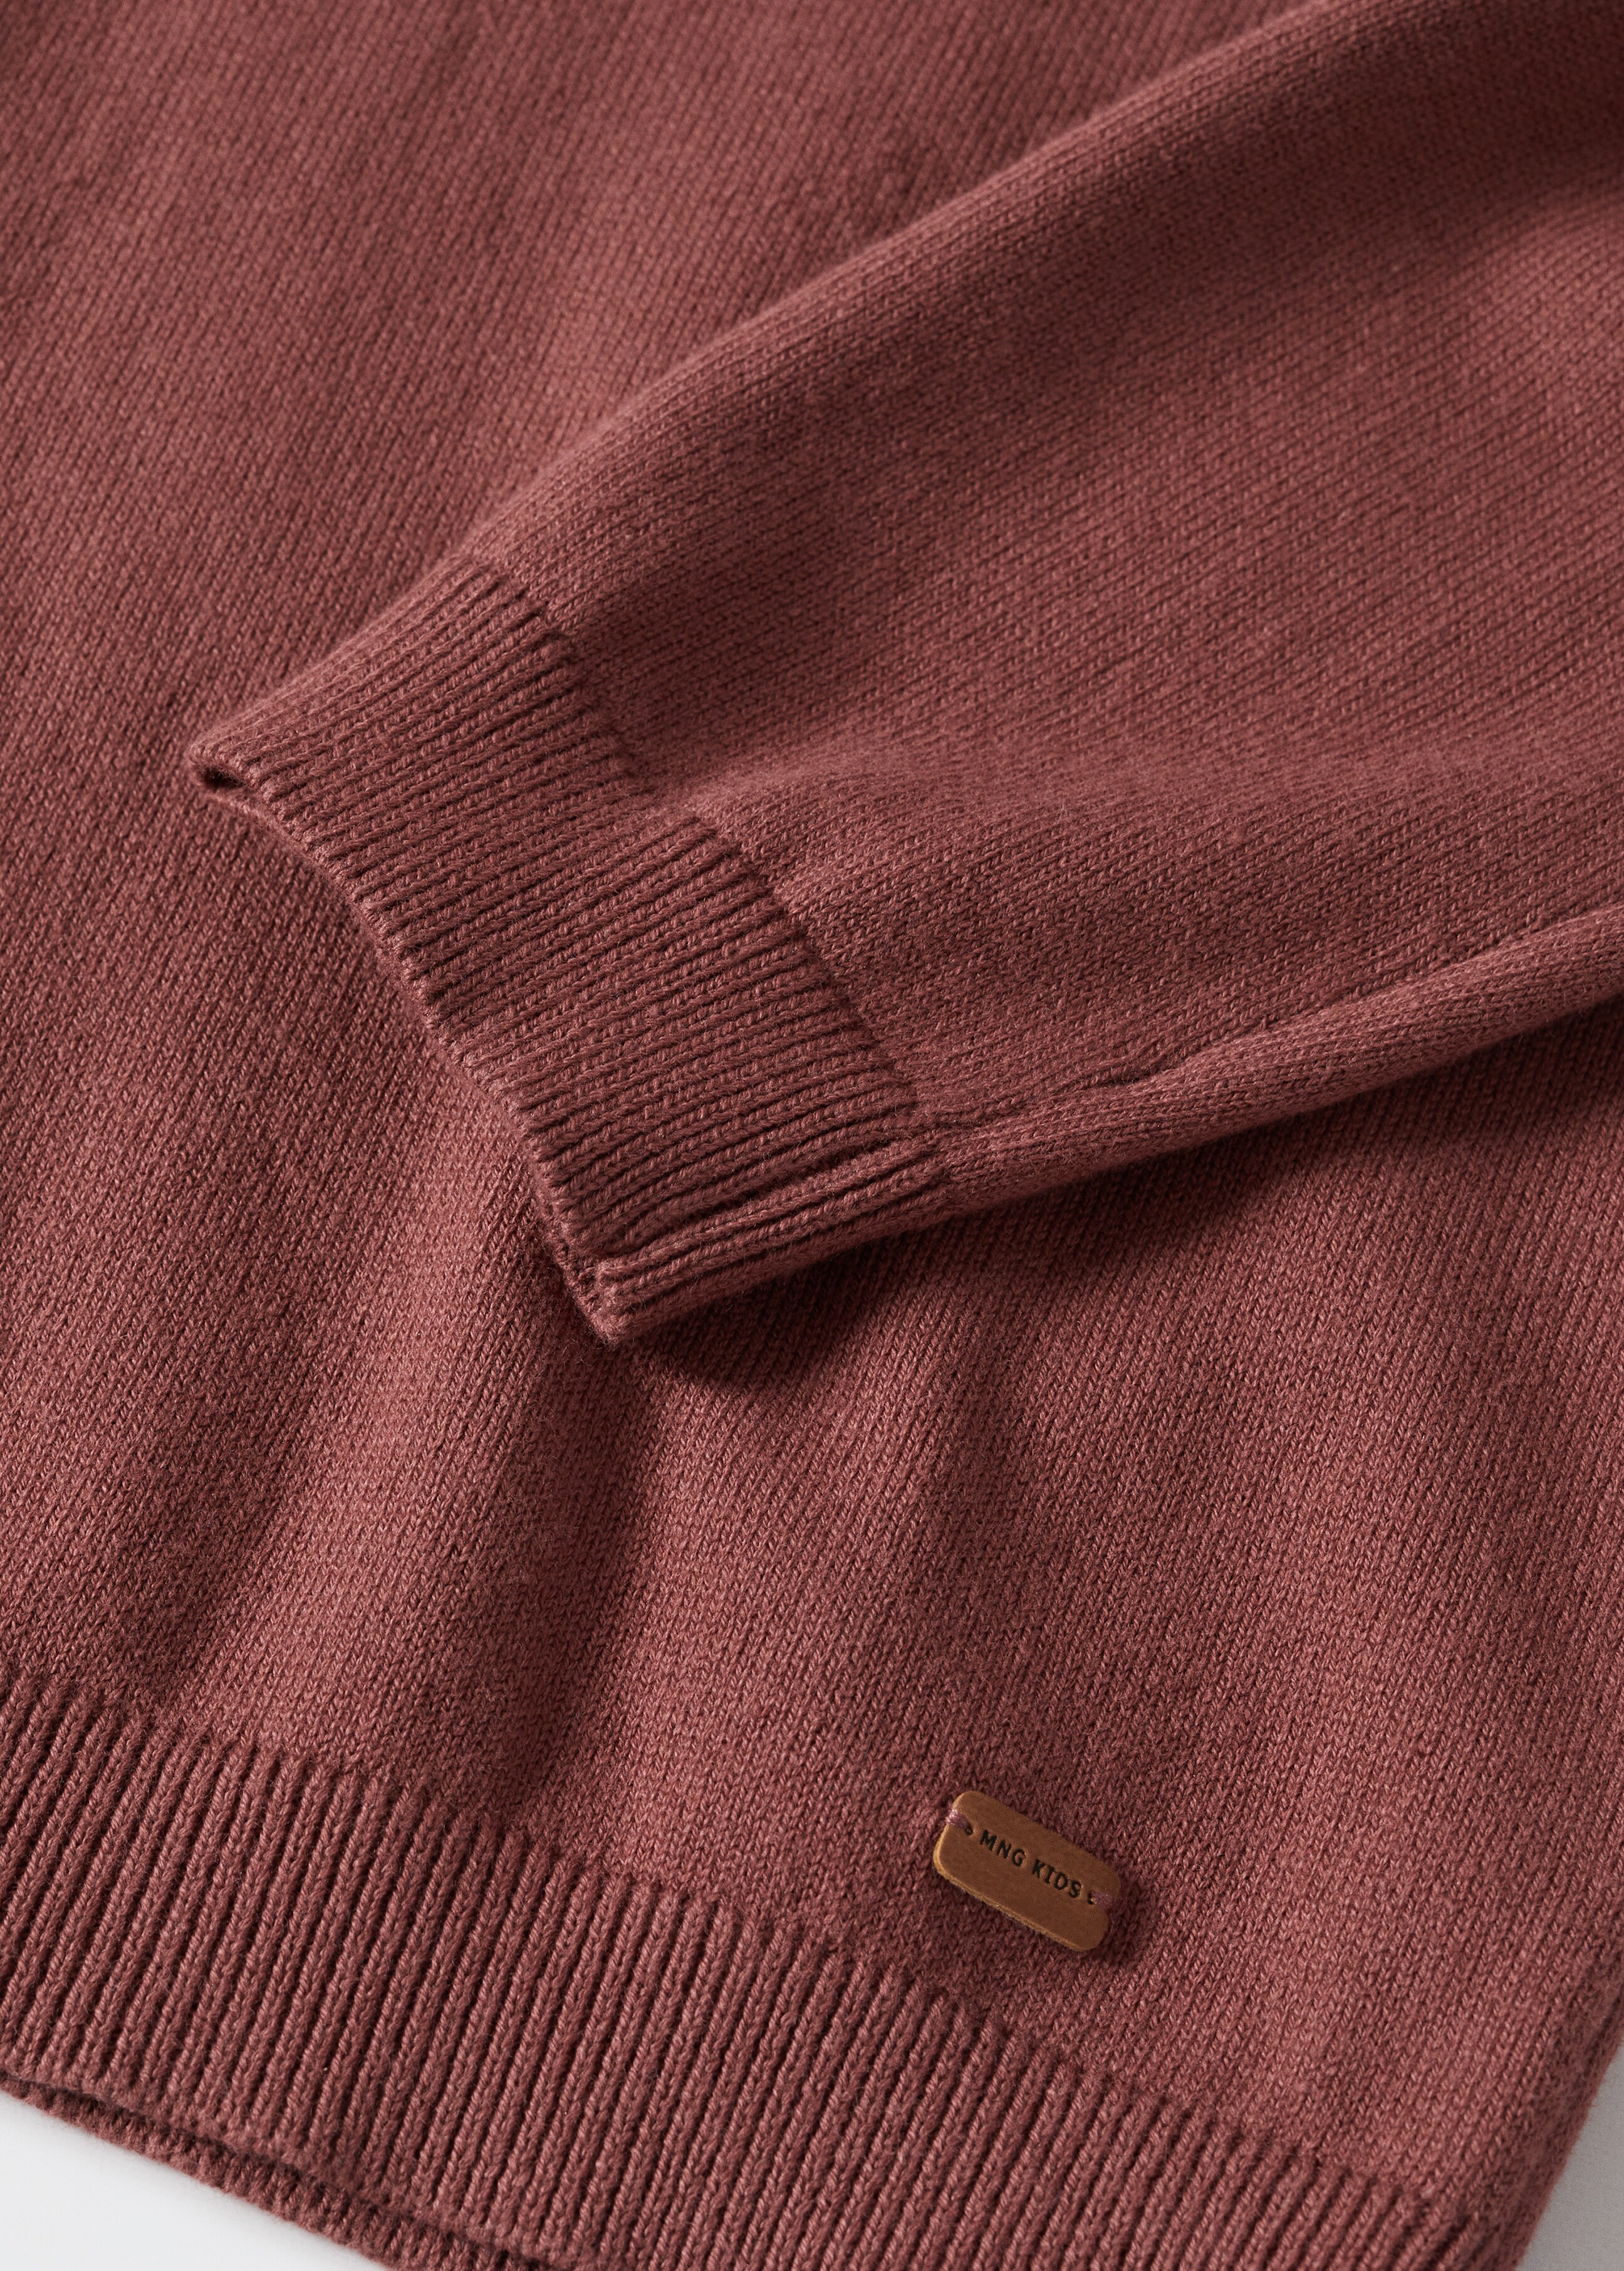 Knit cotton sweater - Details of the article 8